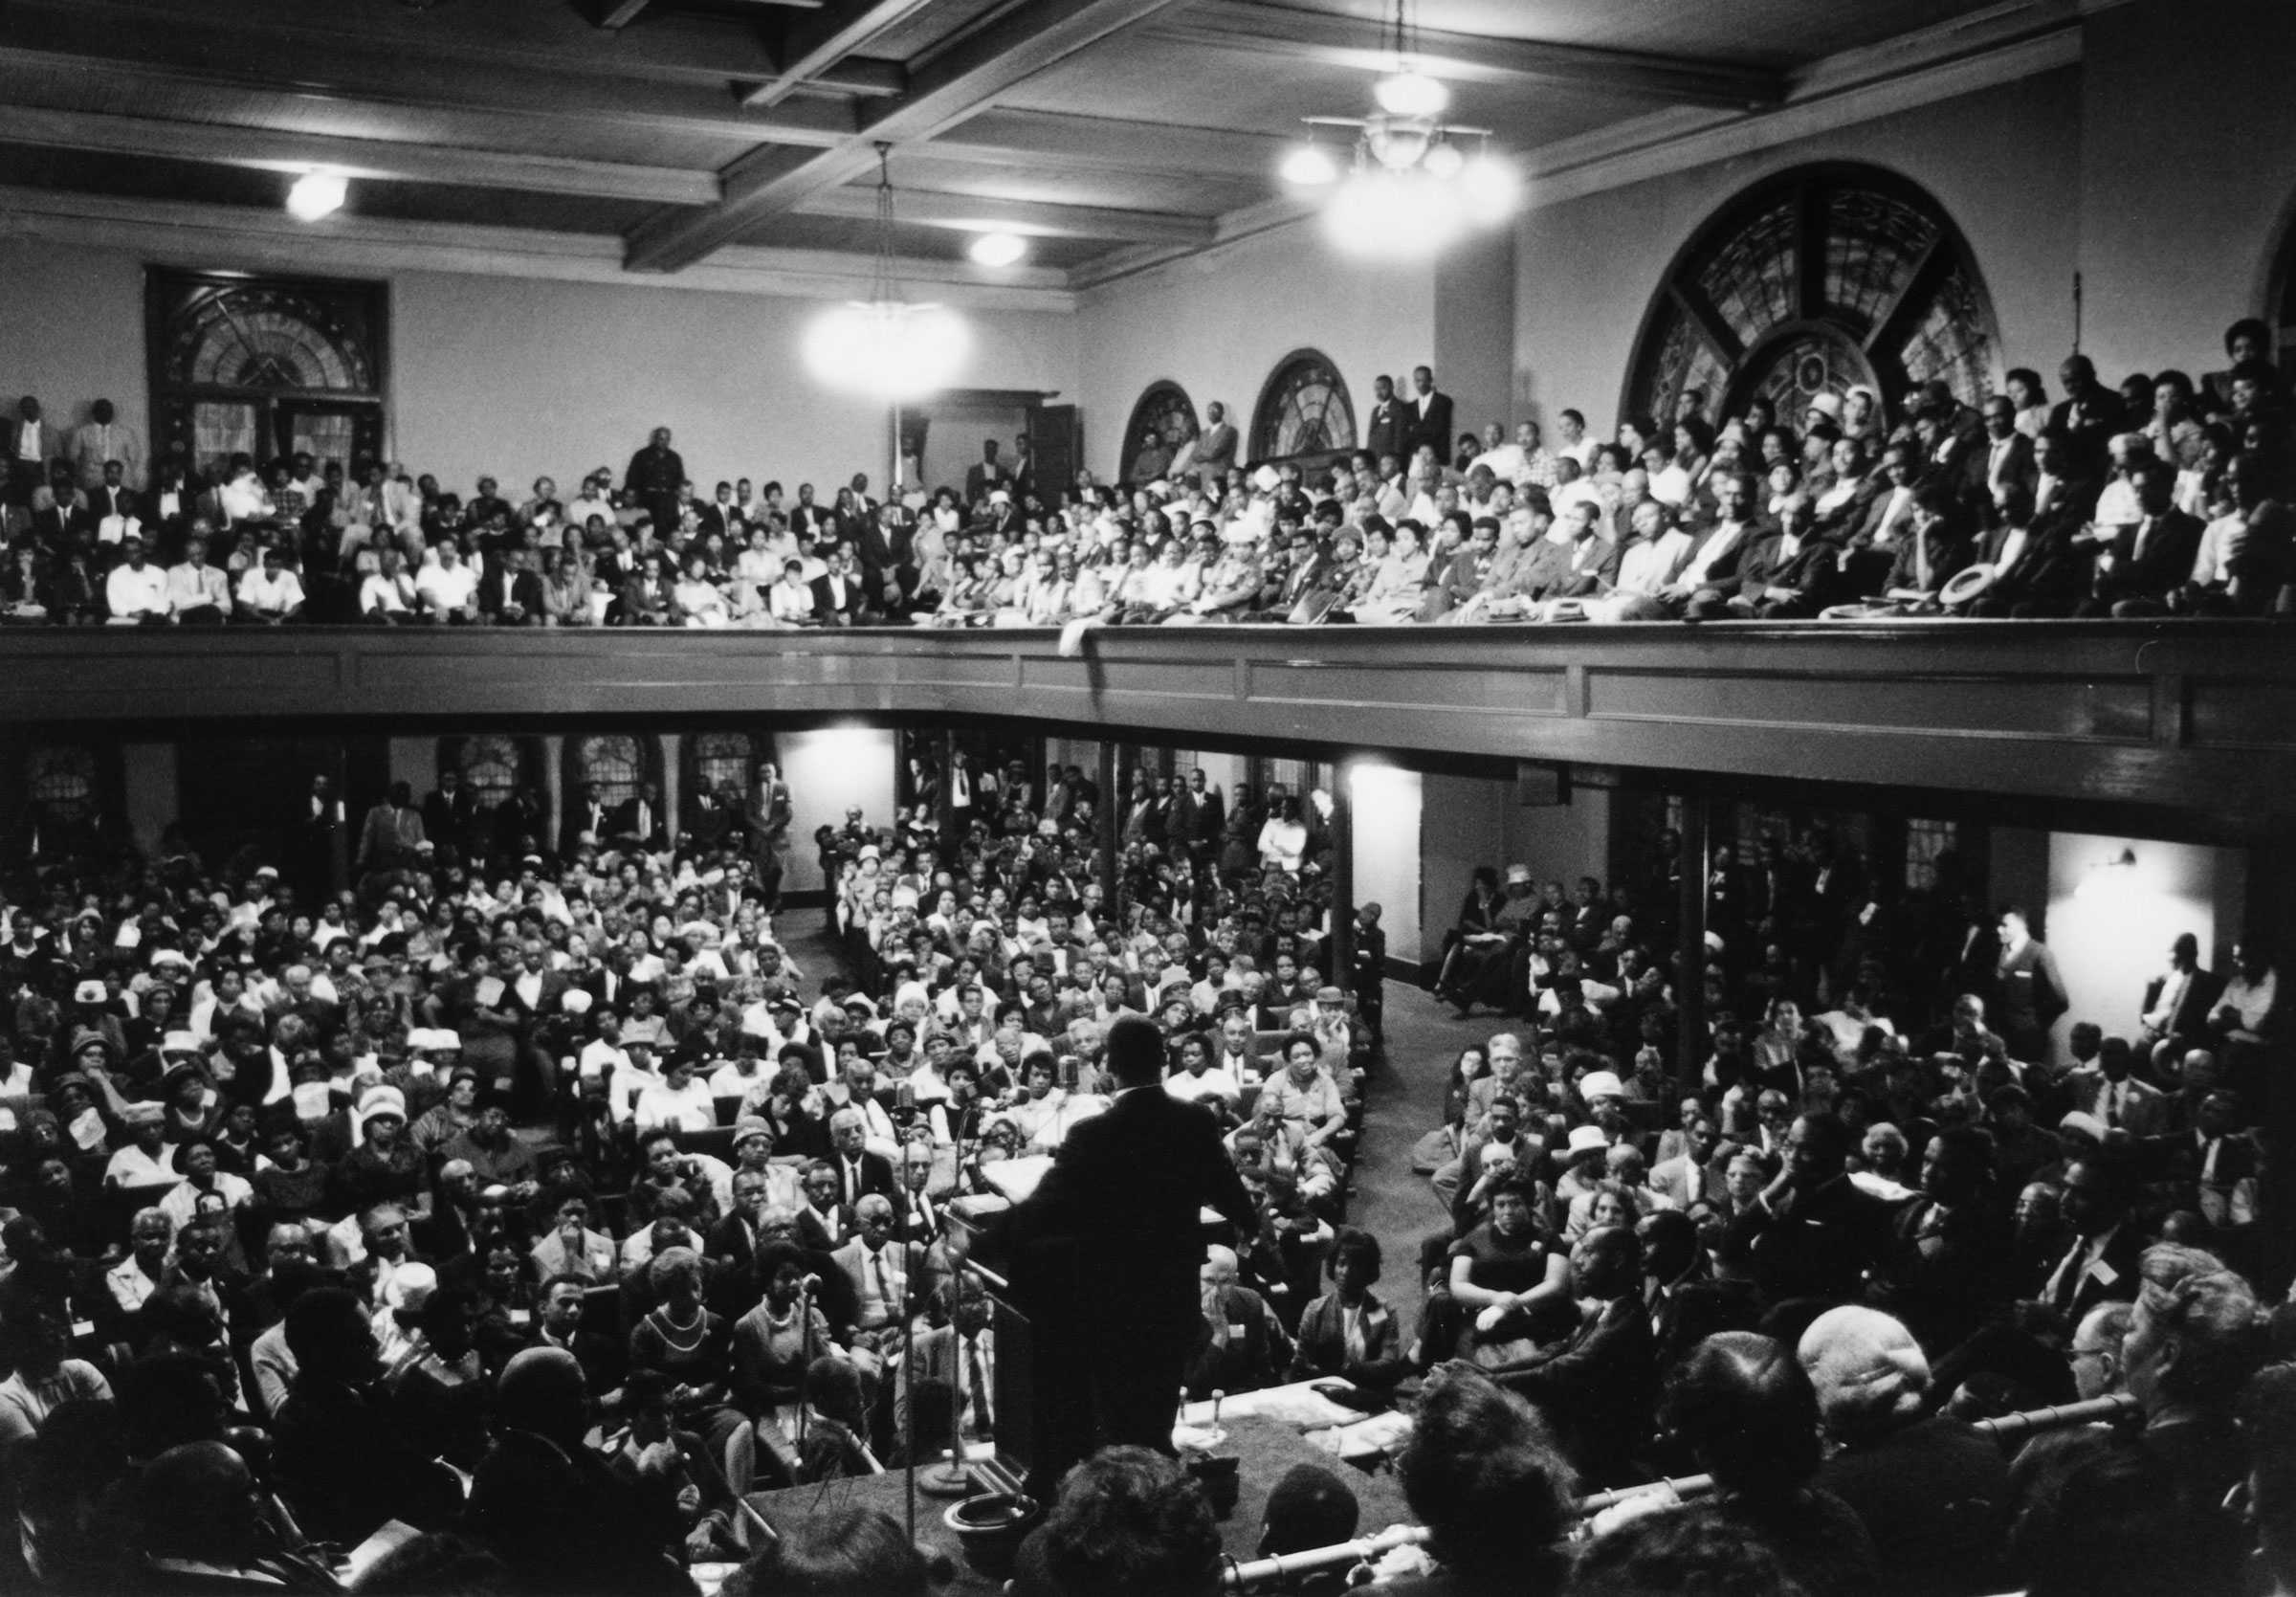 Black and white image of Dr. Martin Luther King Jr. speaking to a large congregation.